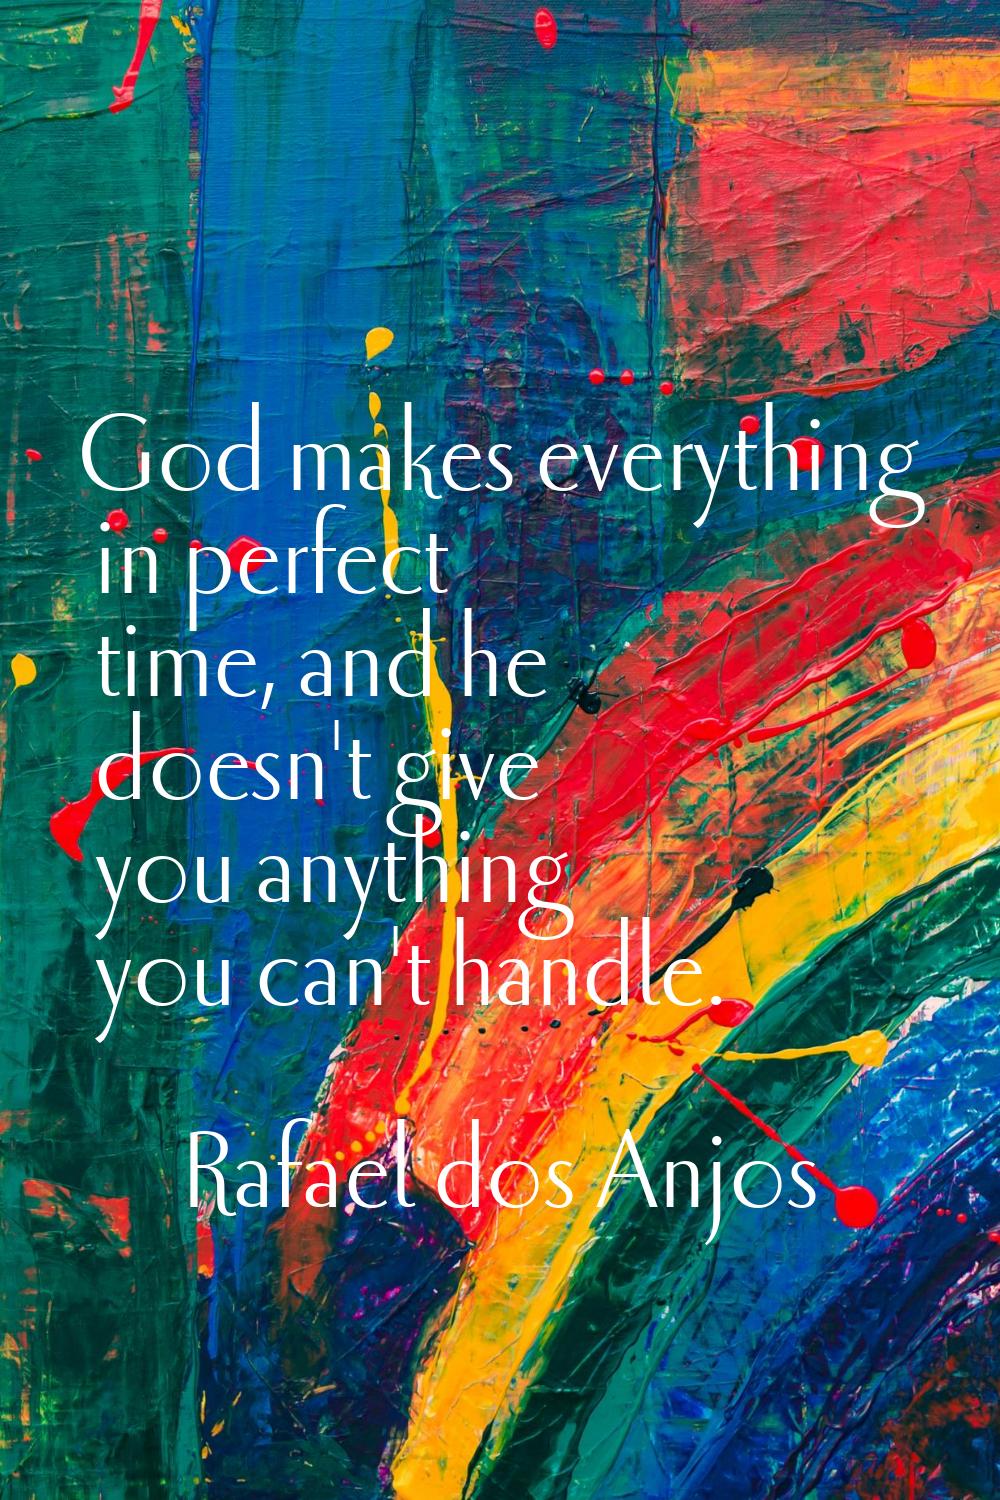 God makes everything in perfect time, and he doesn't give you anything you can't handle.